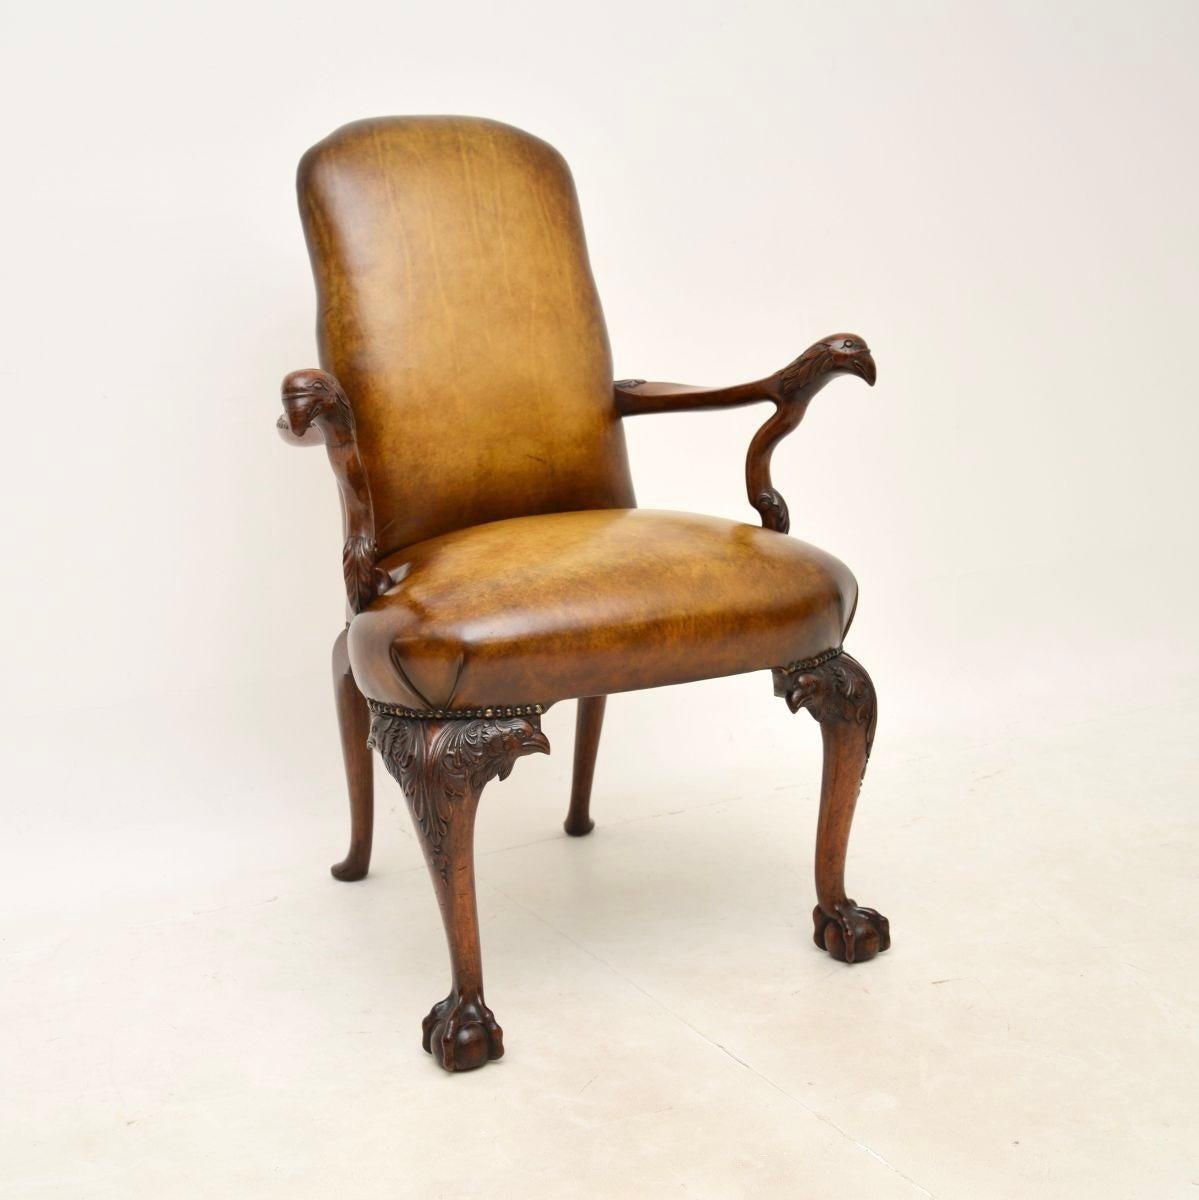 An absolutely magnificent antique Irish Georgian period walnut and leather armchair. This was made in Ireland, we would date it to around the 1750-1780 period.

This is the finest example you could hope to see, widely copied and rarely seen in its